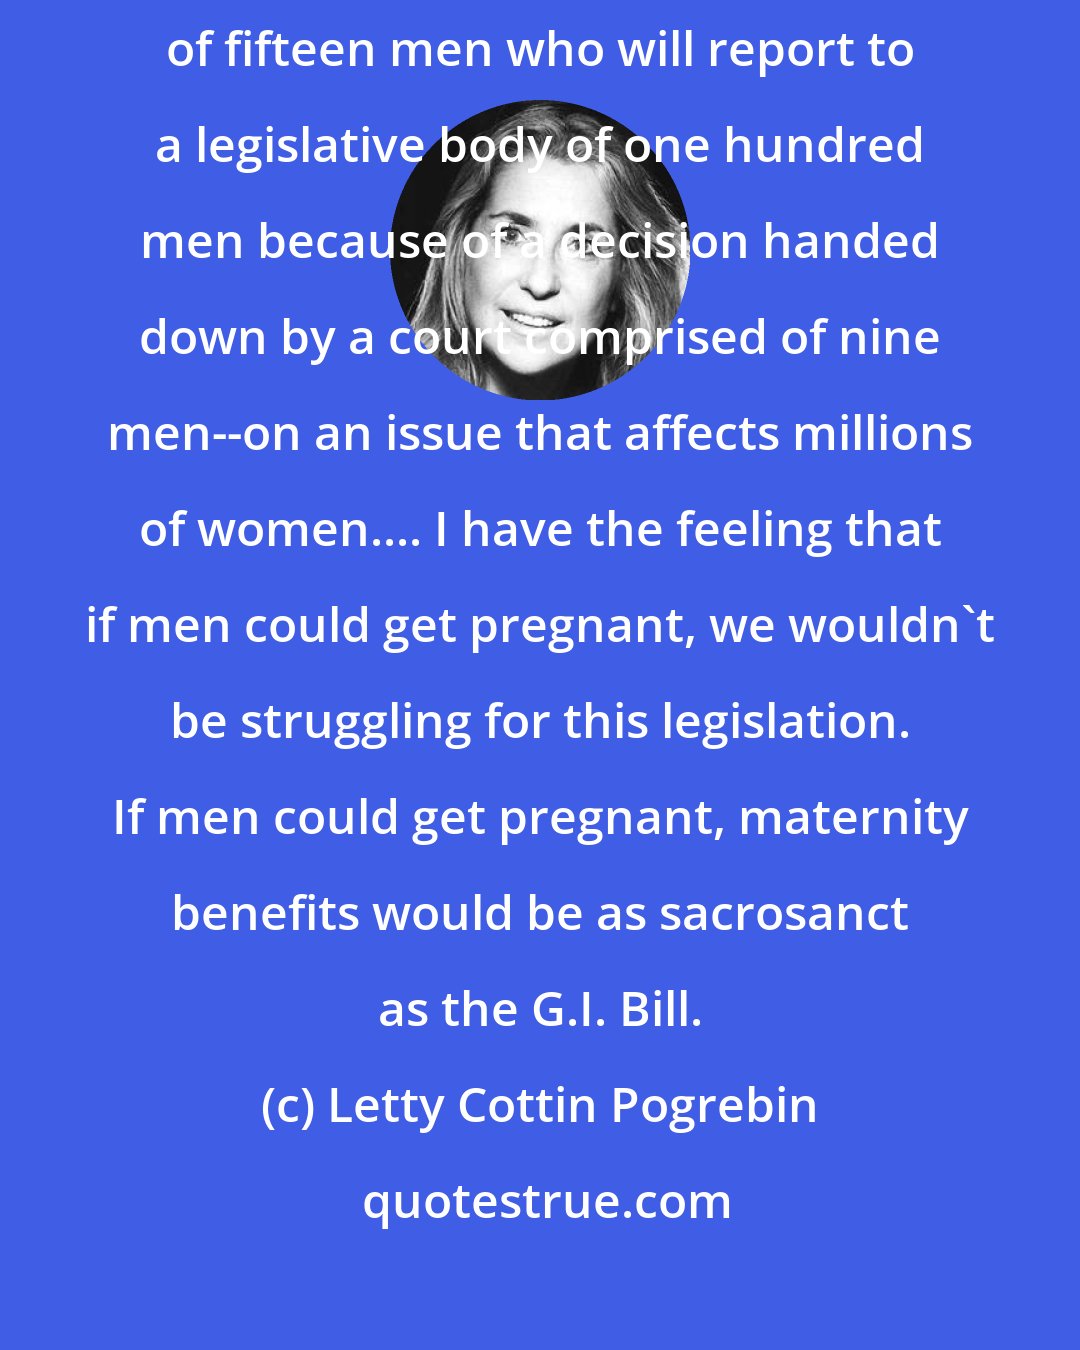 Letty Cottin Pogrebin: I find it profoundly symbolic that I am appearing before a committee of fifteen men who will report to a legislative body of one hundred men because of a decision handed down by a court comprised of nine men--on an issue that affects millions of women.... I have the feeling that if men could get pregnant, we wouldn't be struggling for this legislation. If men could get pregnant, maternity benefits would be as sacrosanct as the G.I. Bill.